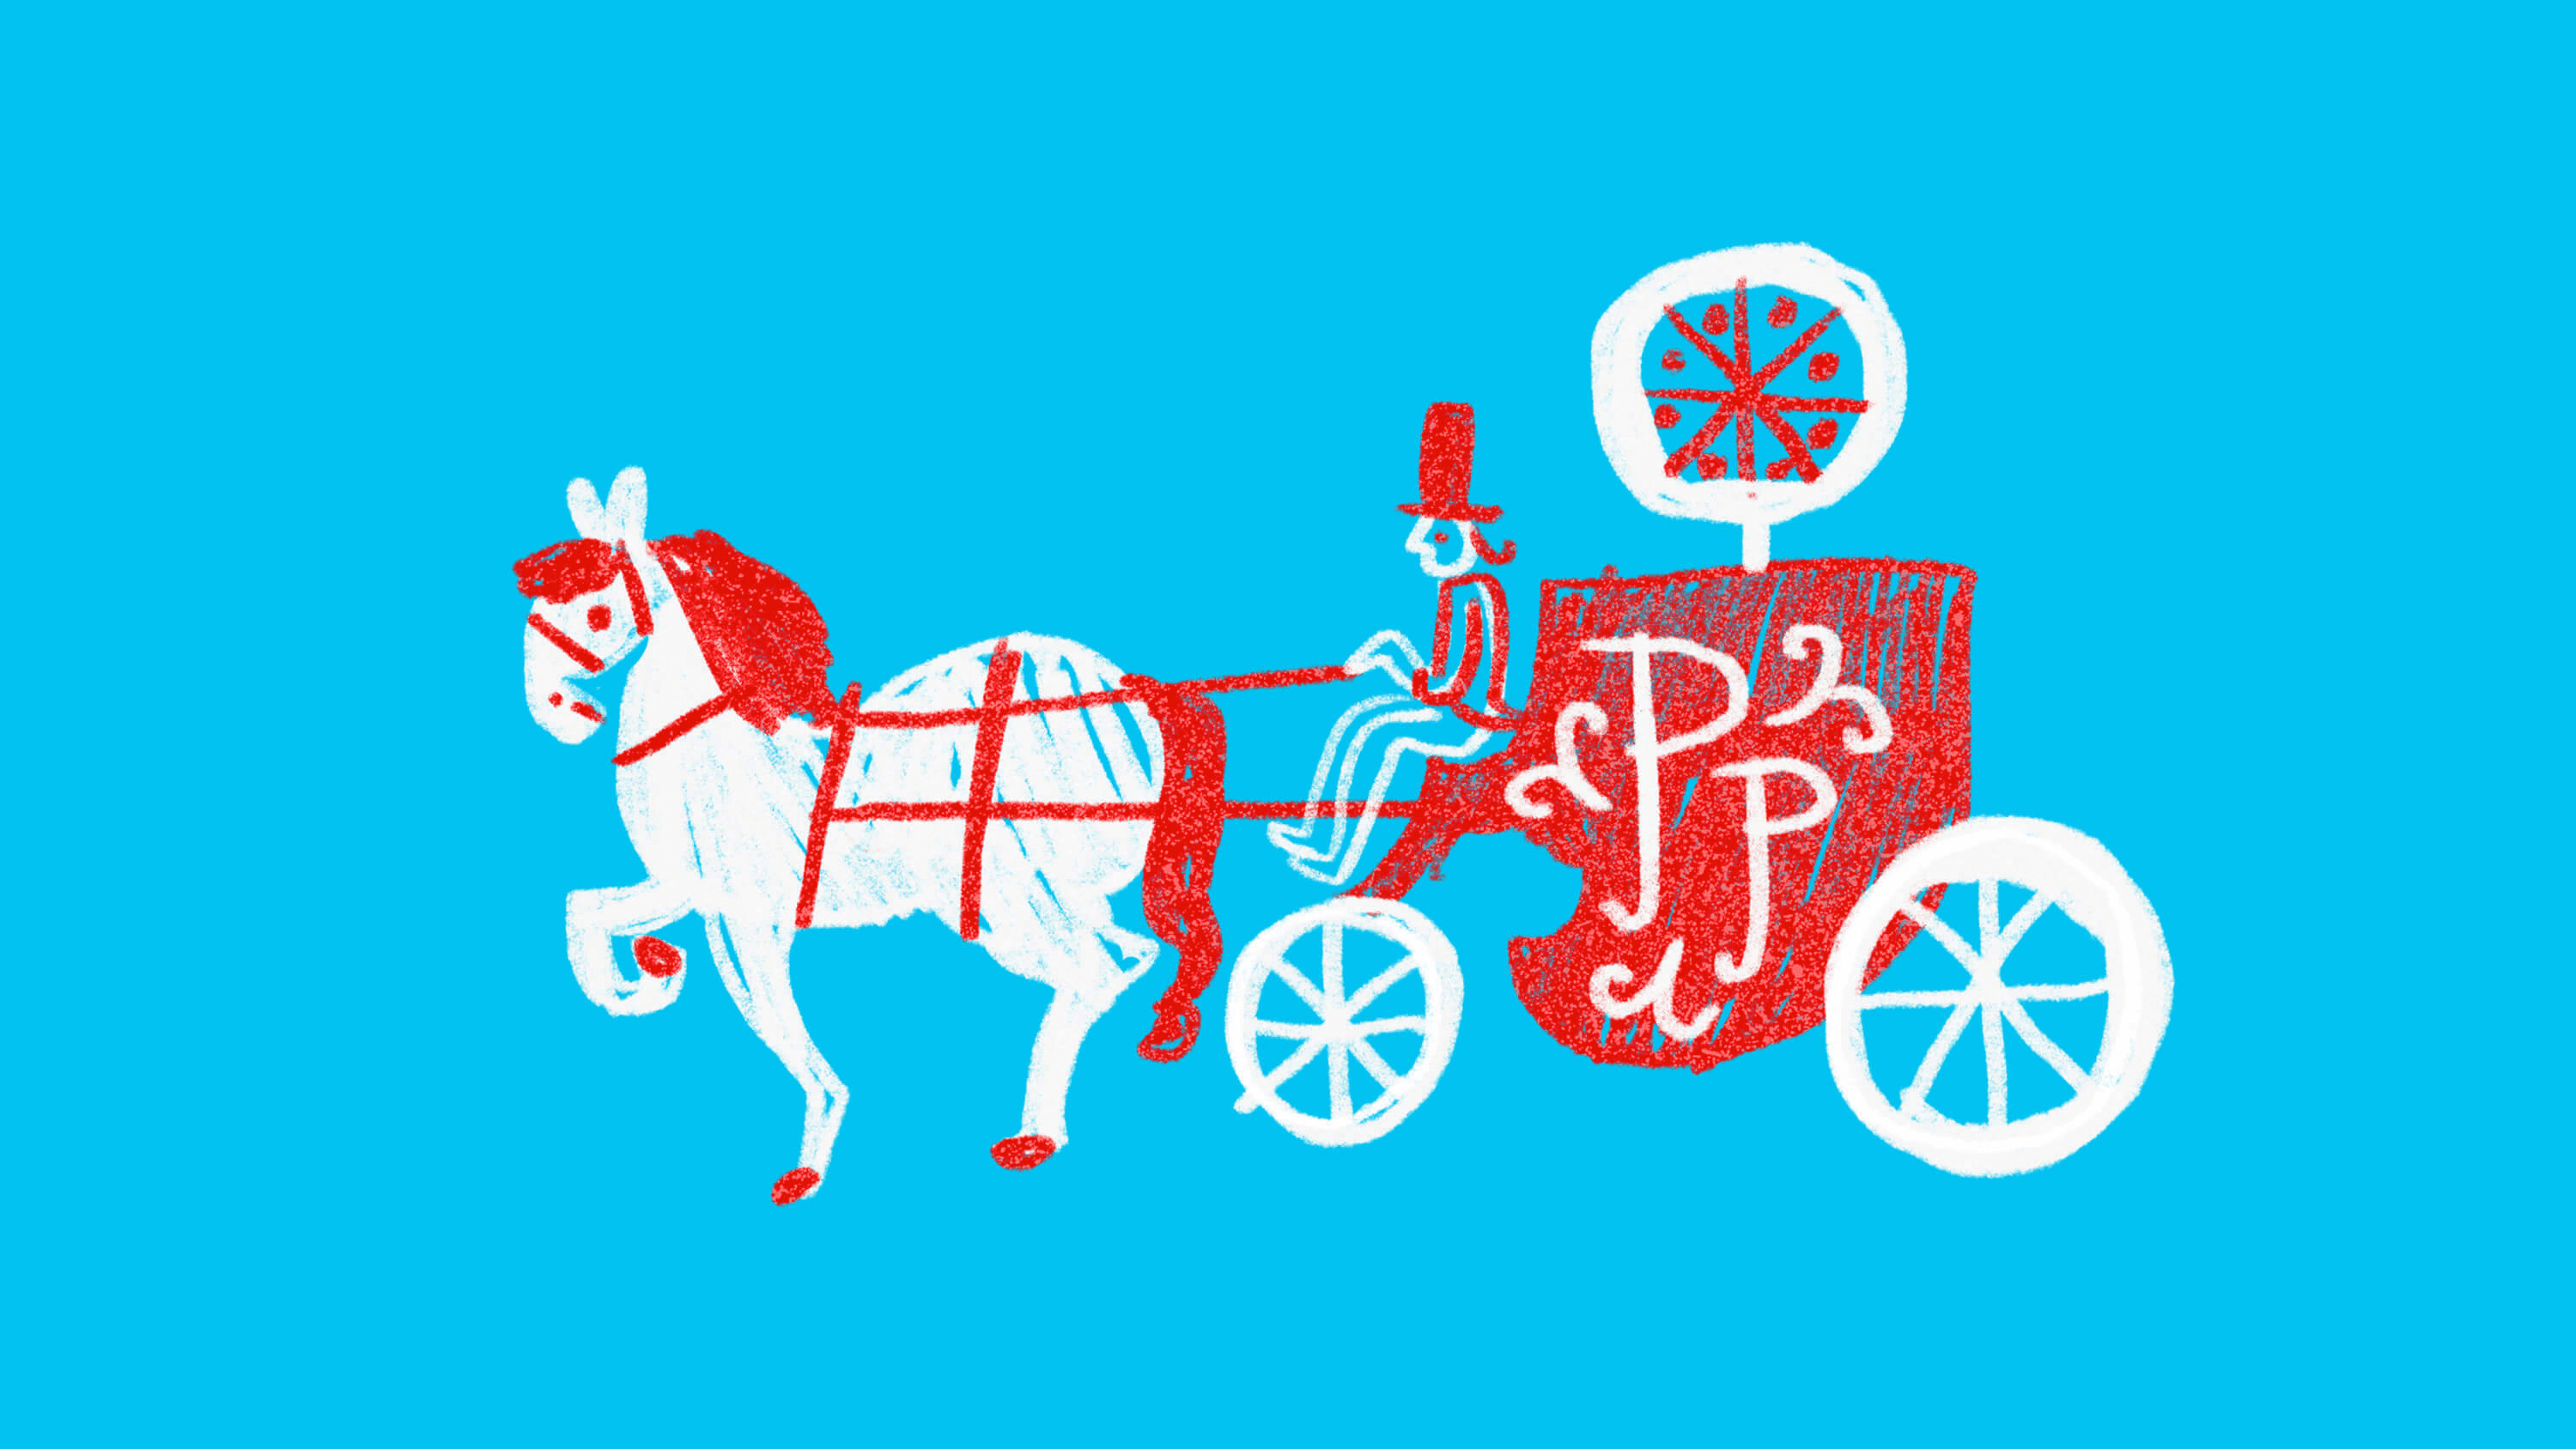 rebrand-success-photo-pizza-palace-horse-and-carriage-01.png